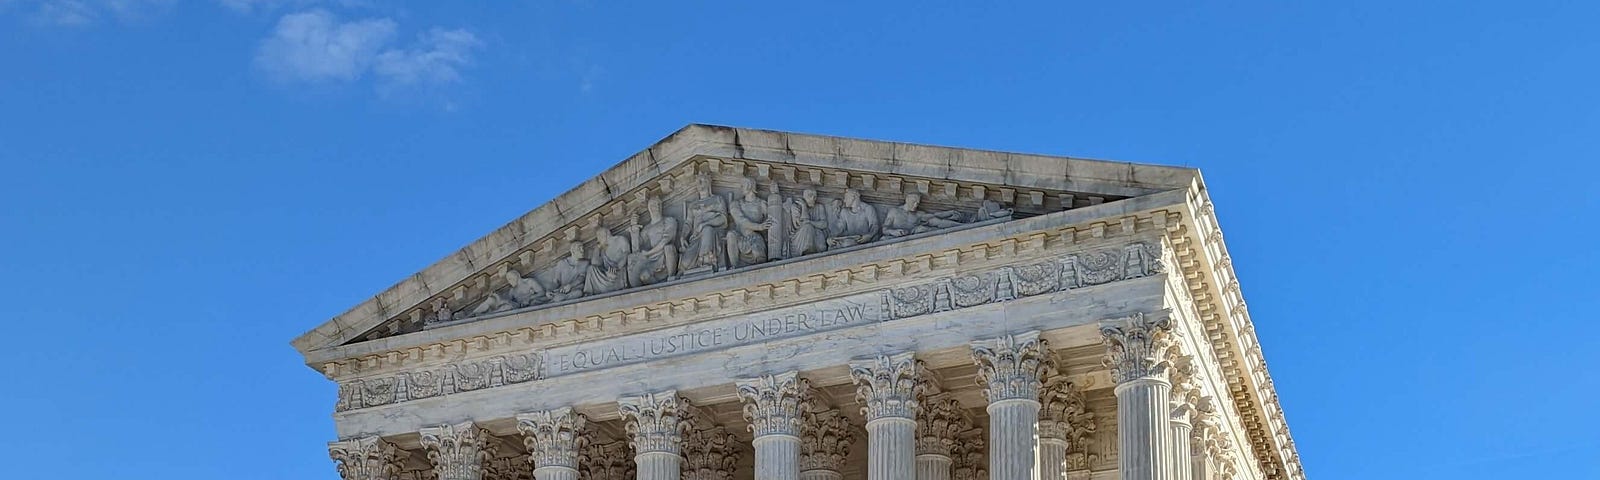 Front view of the U.S. Supreme Court building with steps and plaza in foreground